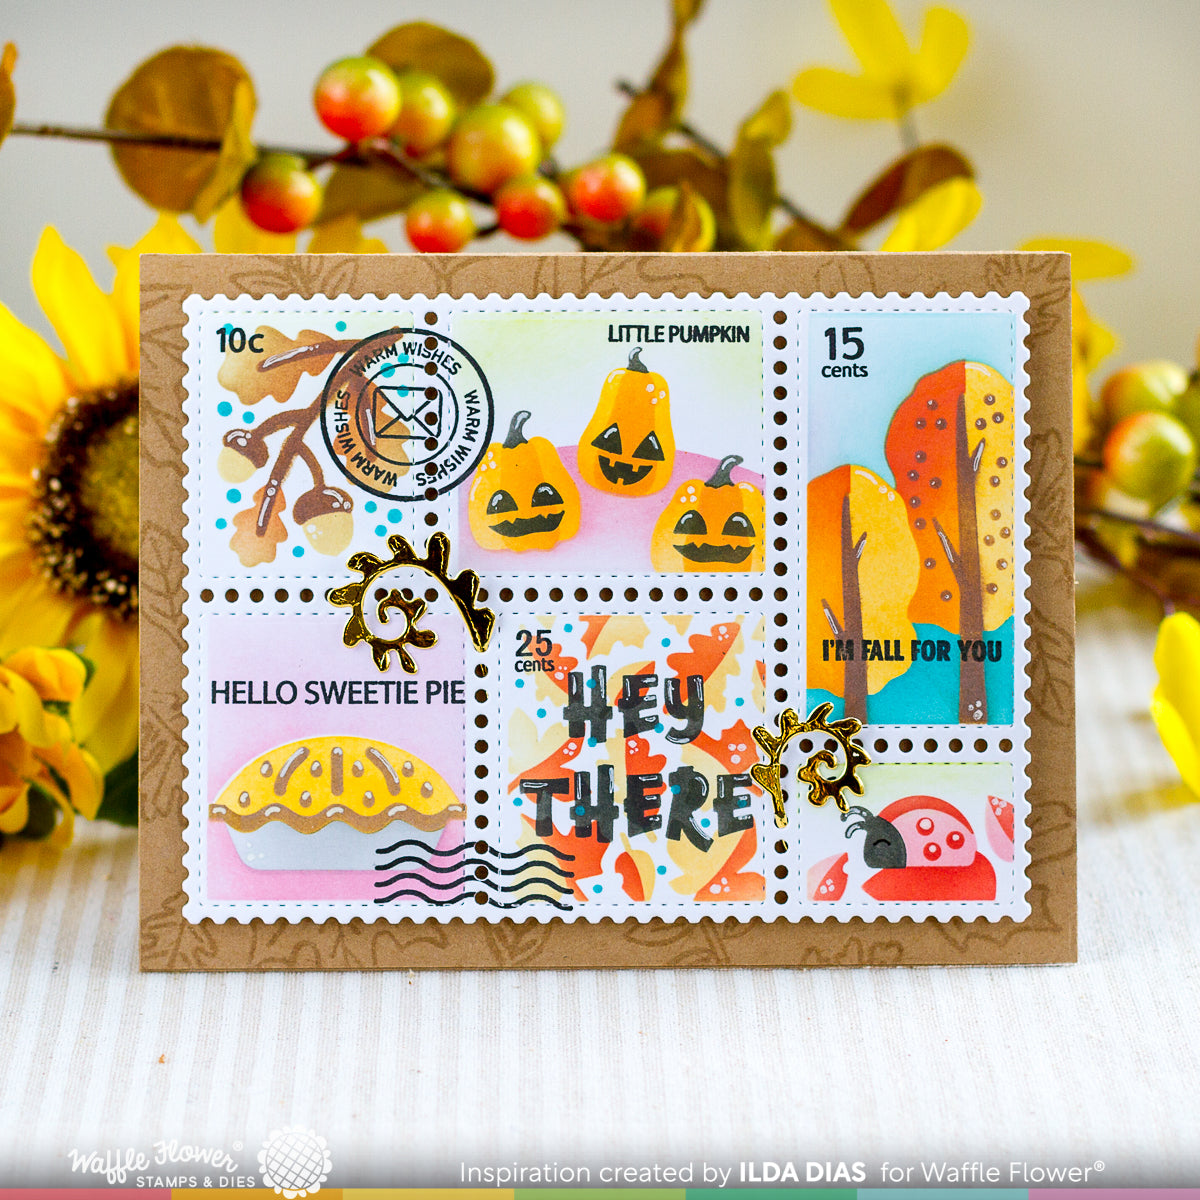 Floral stamps from Fall 2019 Release – The Season